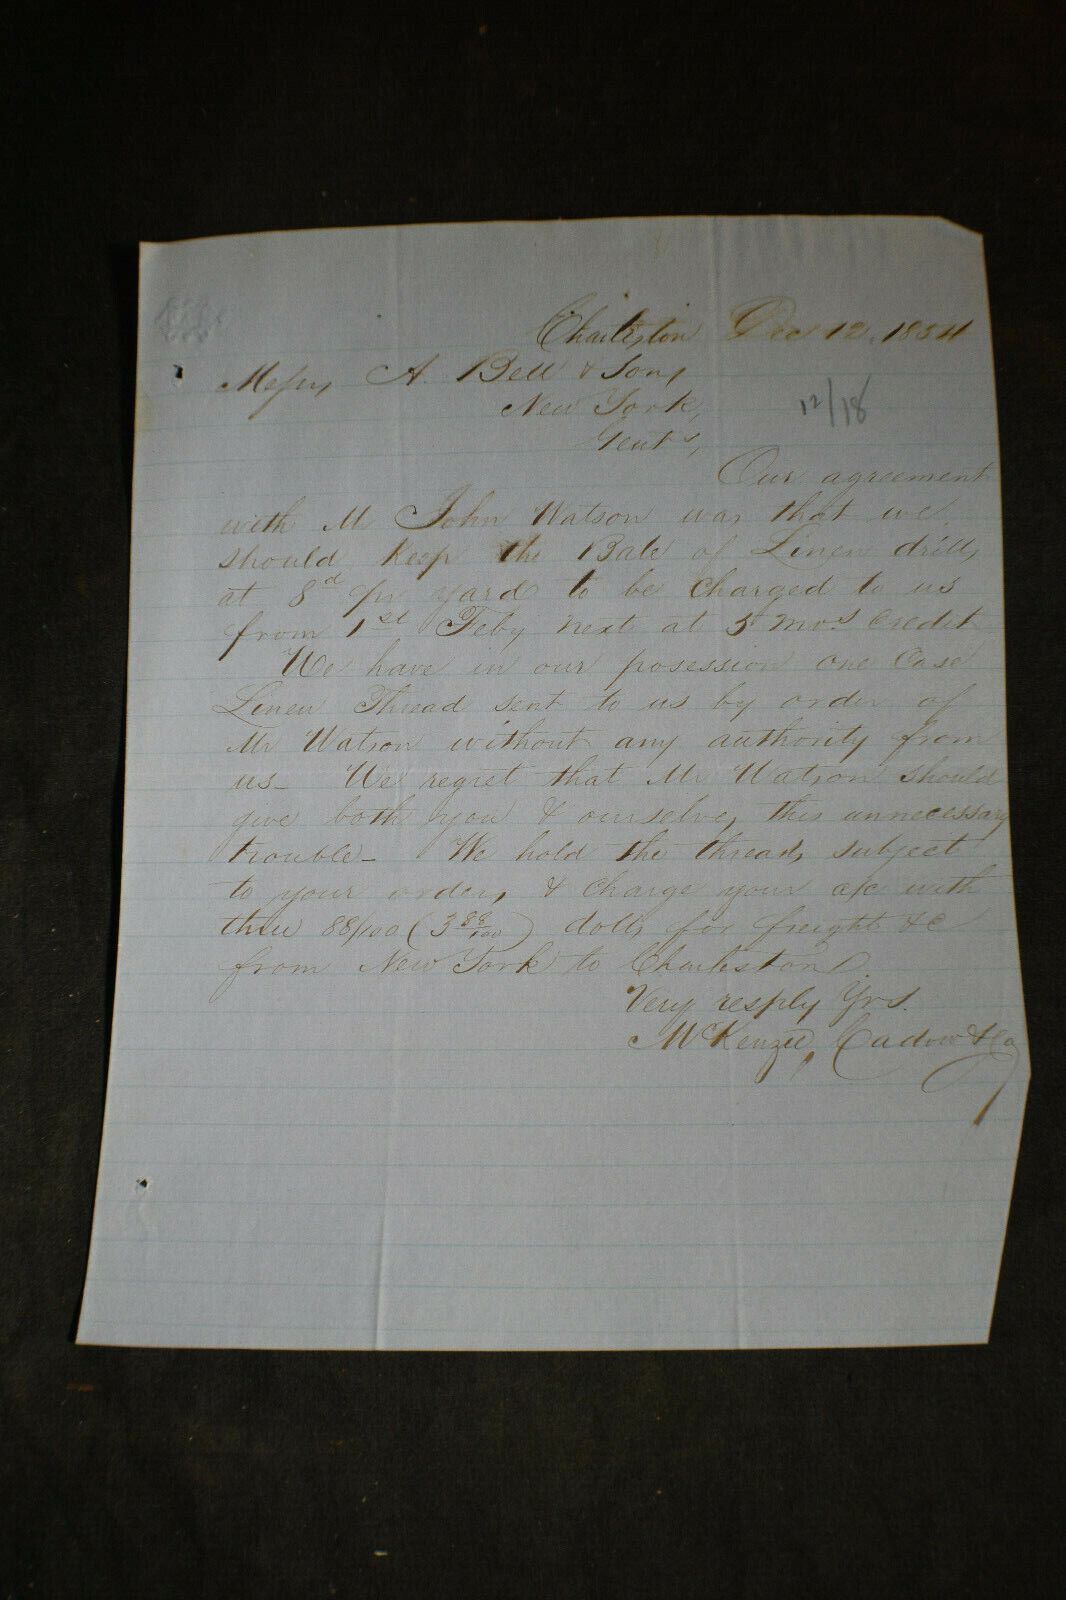 1854 Mckenzie Cadow & Co Charleston SC to A Bell Commission Merchant, NY City